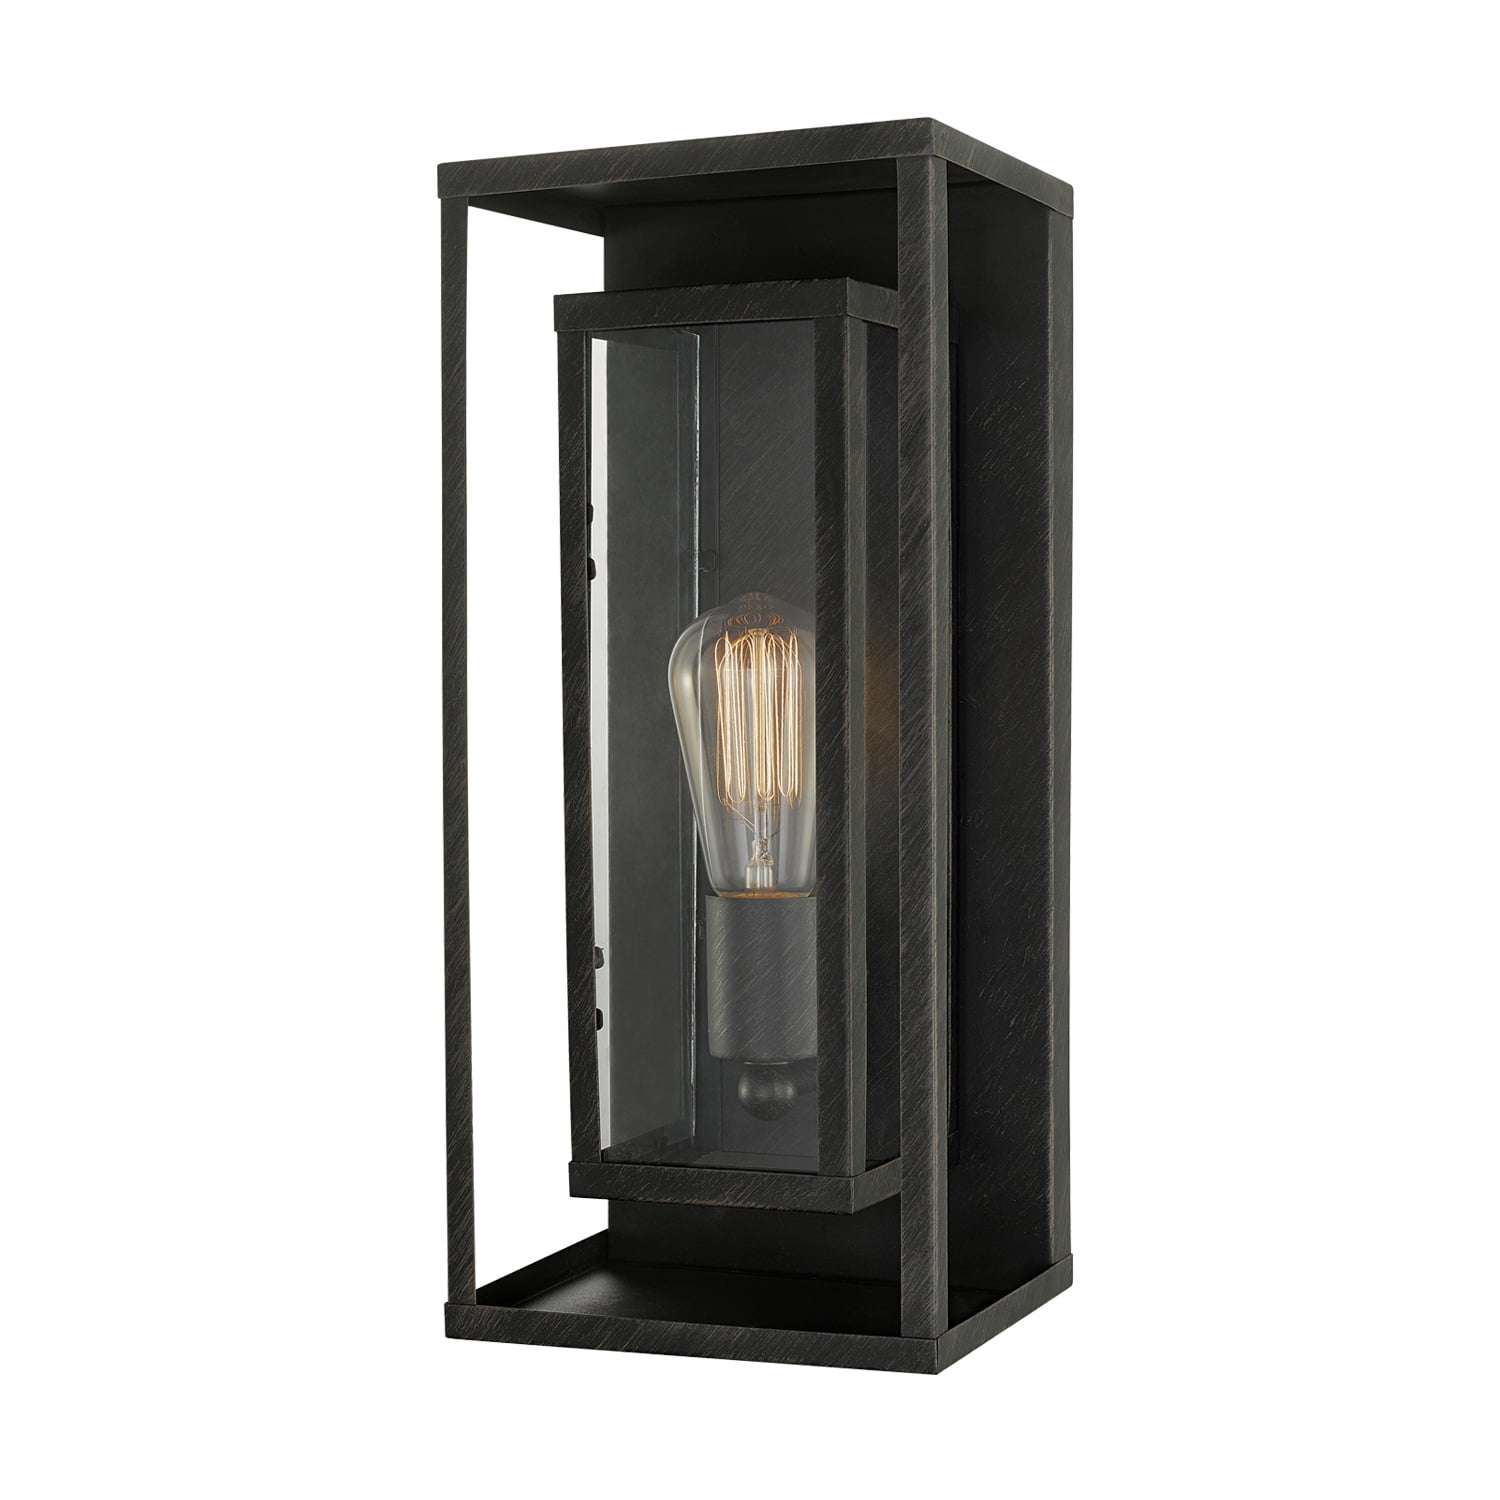 Globe Electric Neruda 1-Light Outdoor Indoor Wall Sconce Seeded Glass Shade 44335 Matte Black